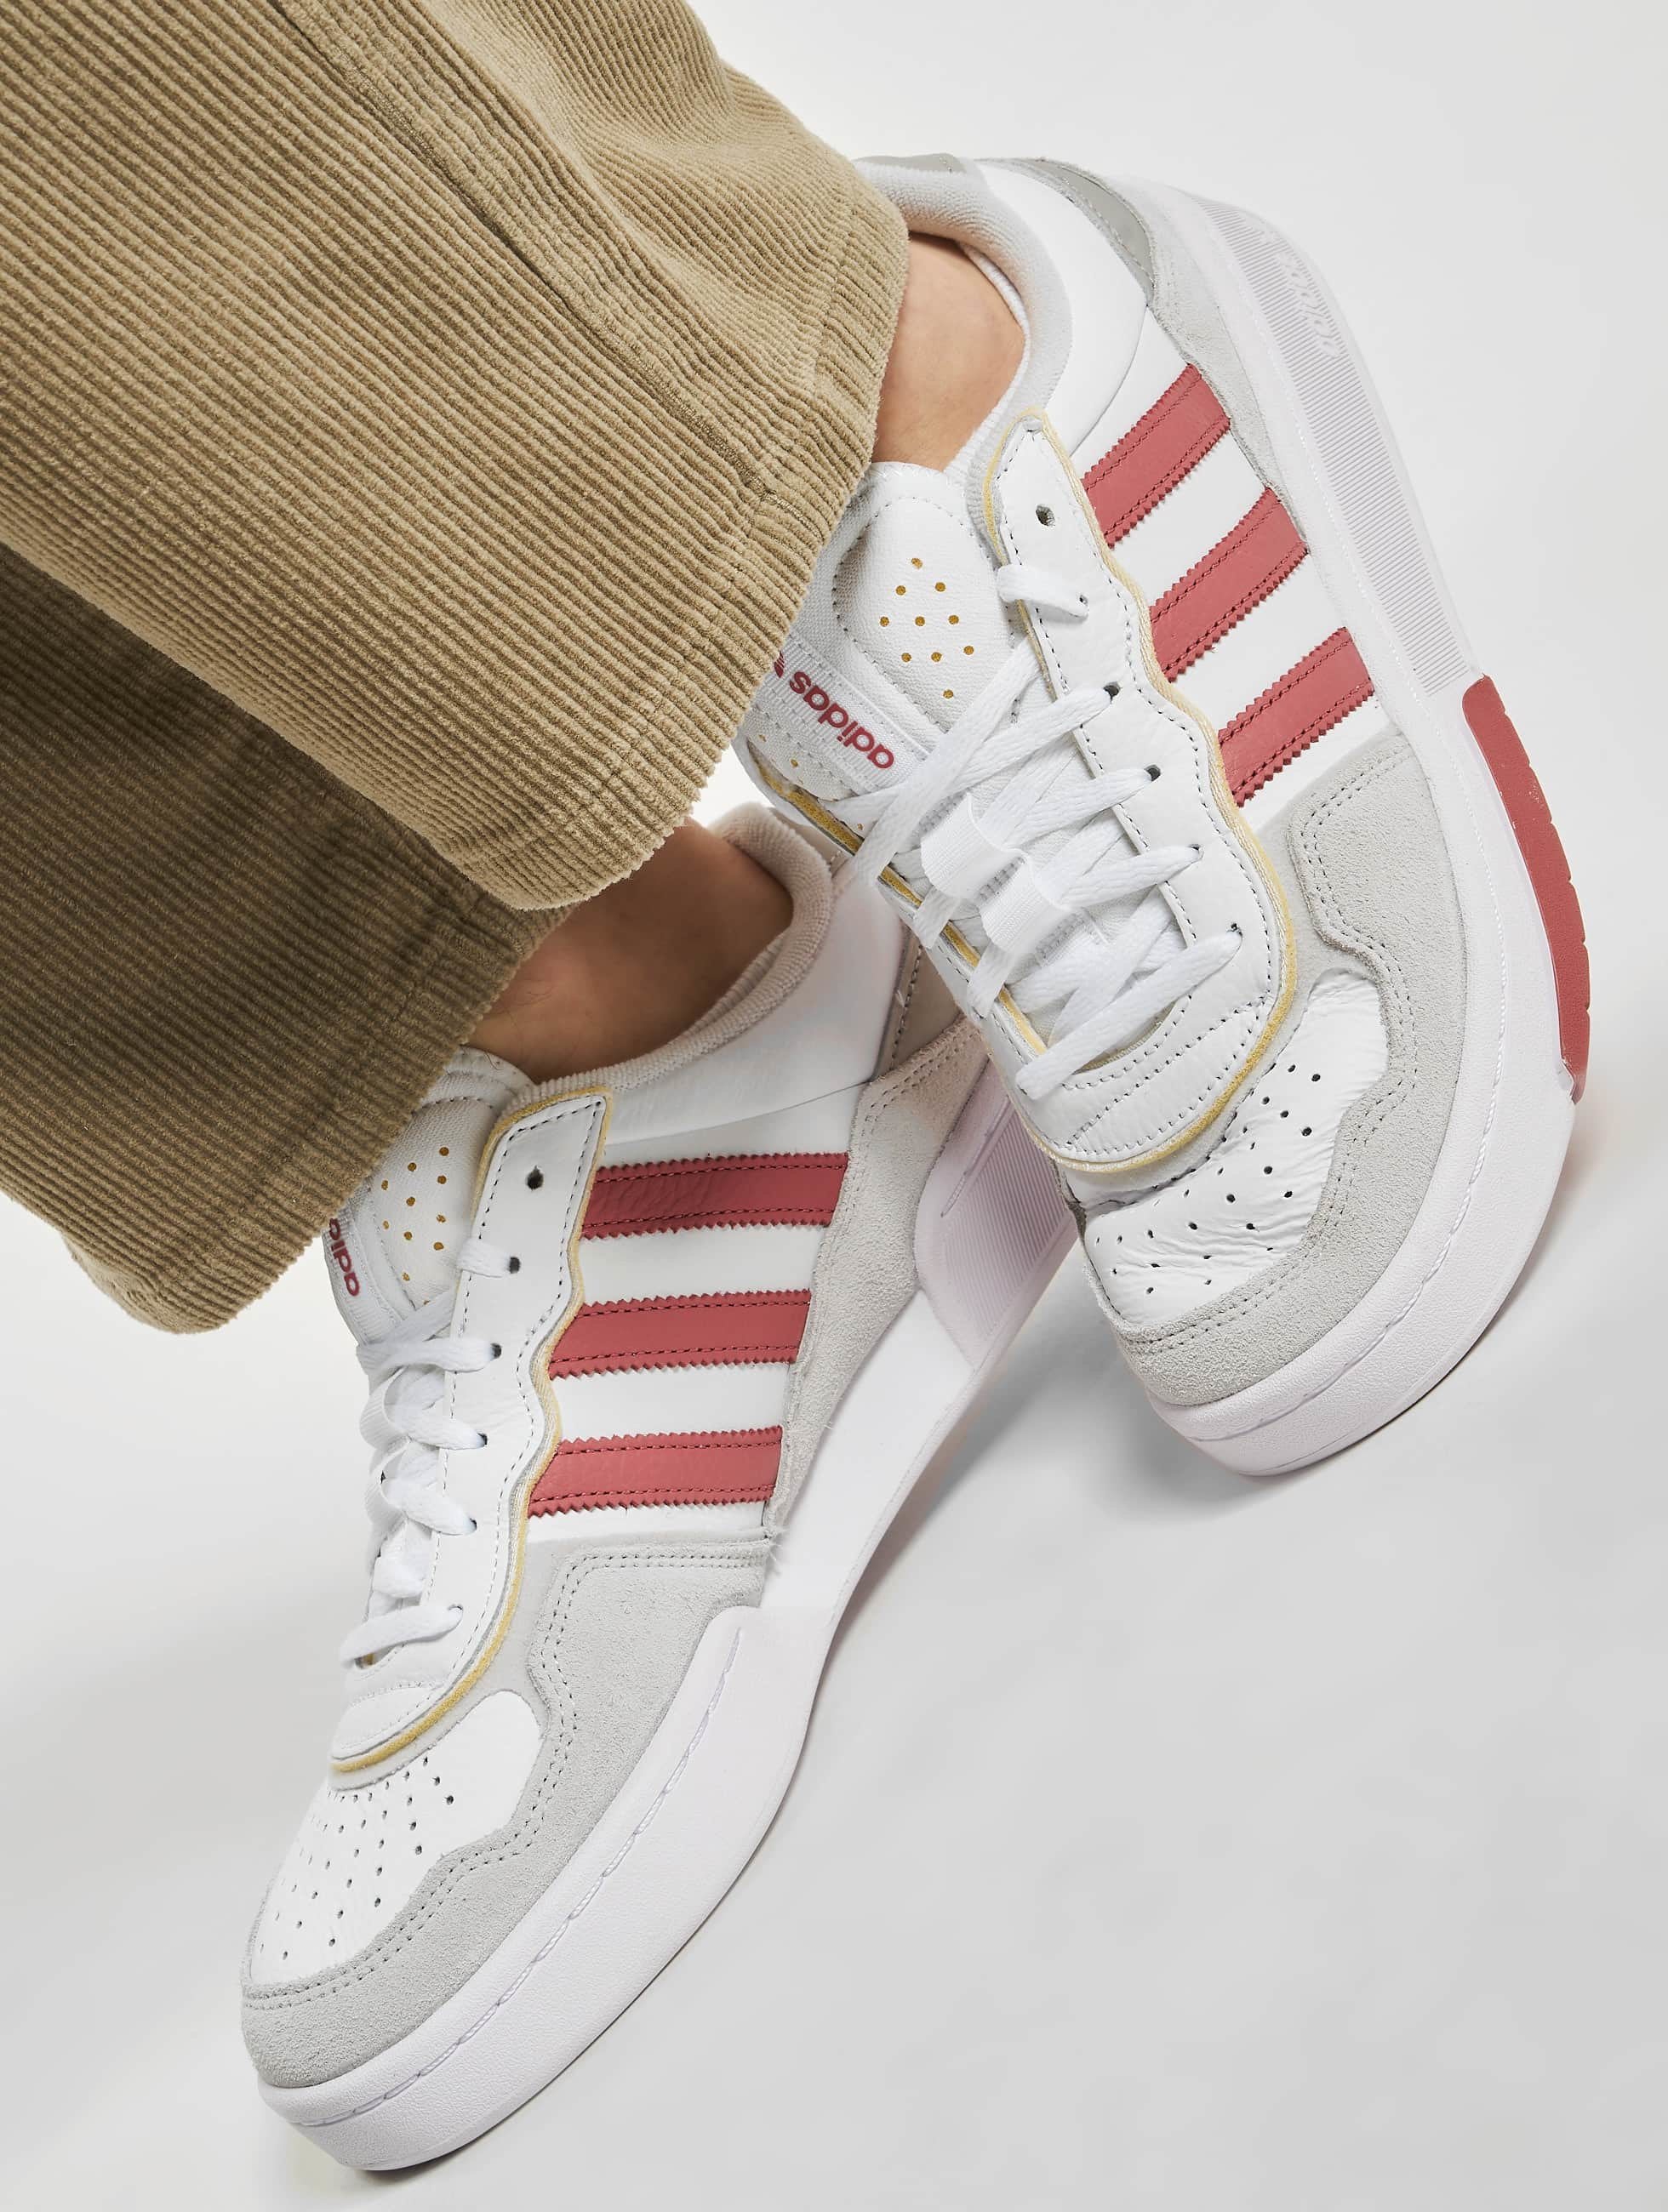 adidas / Sneakers Originals Courtic in white